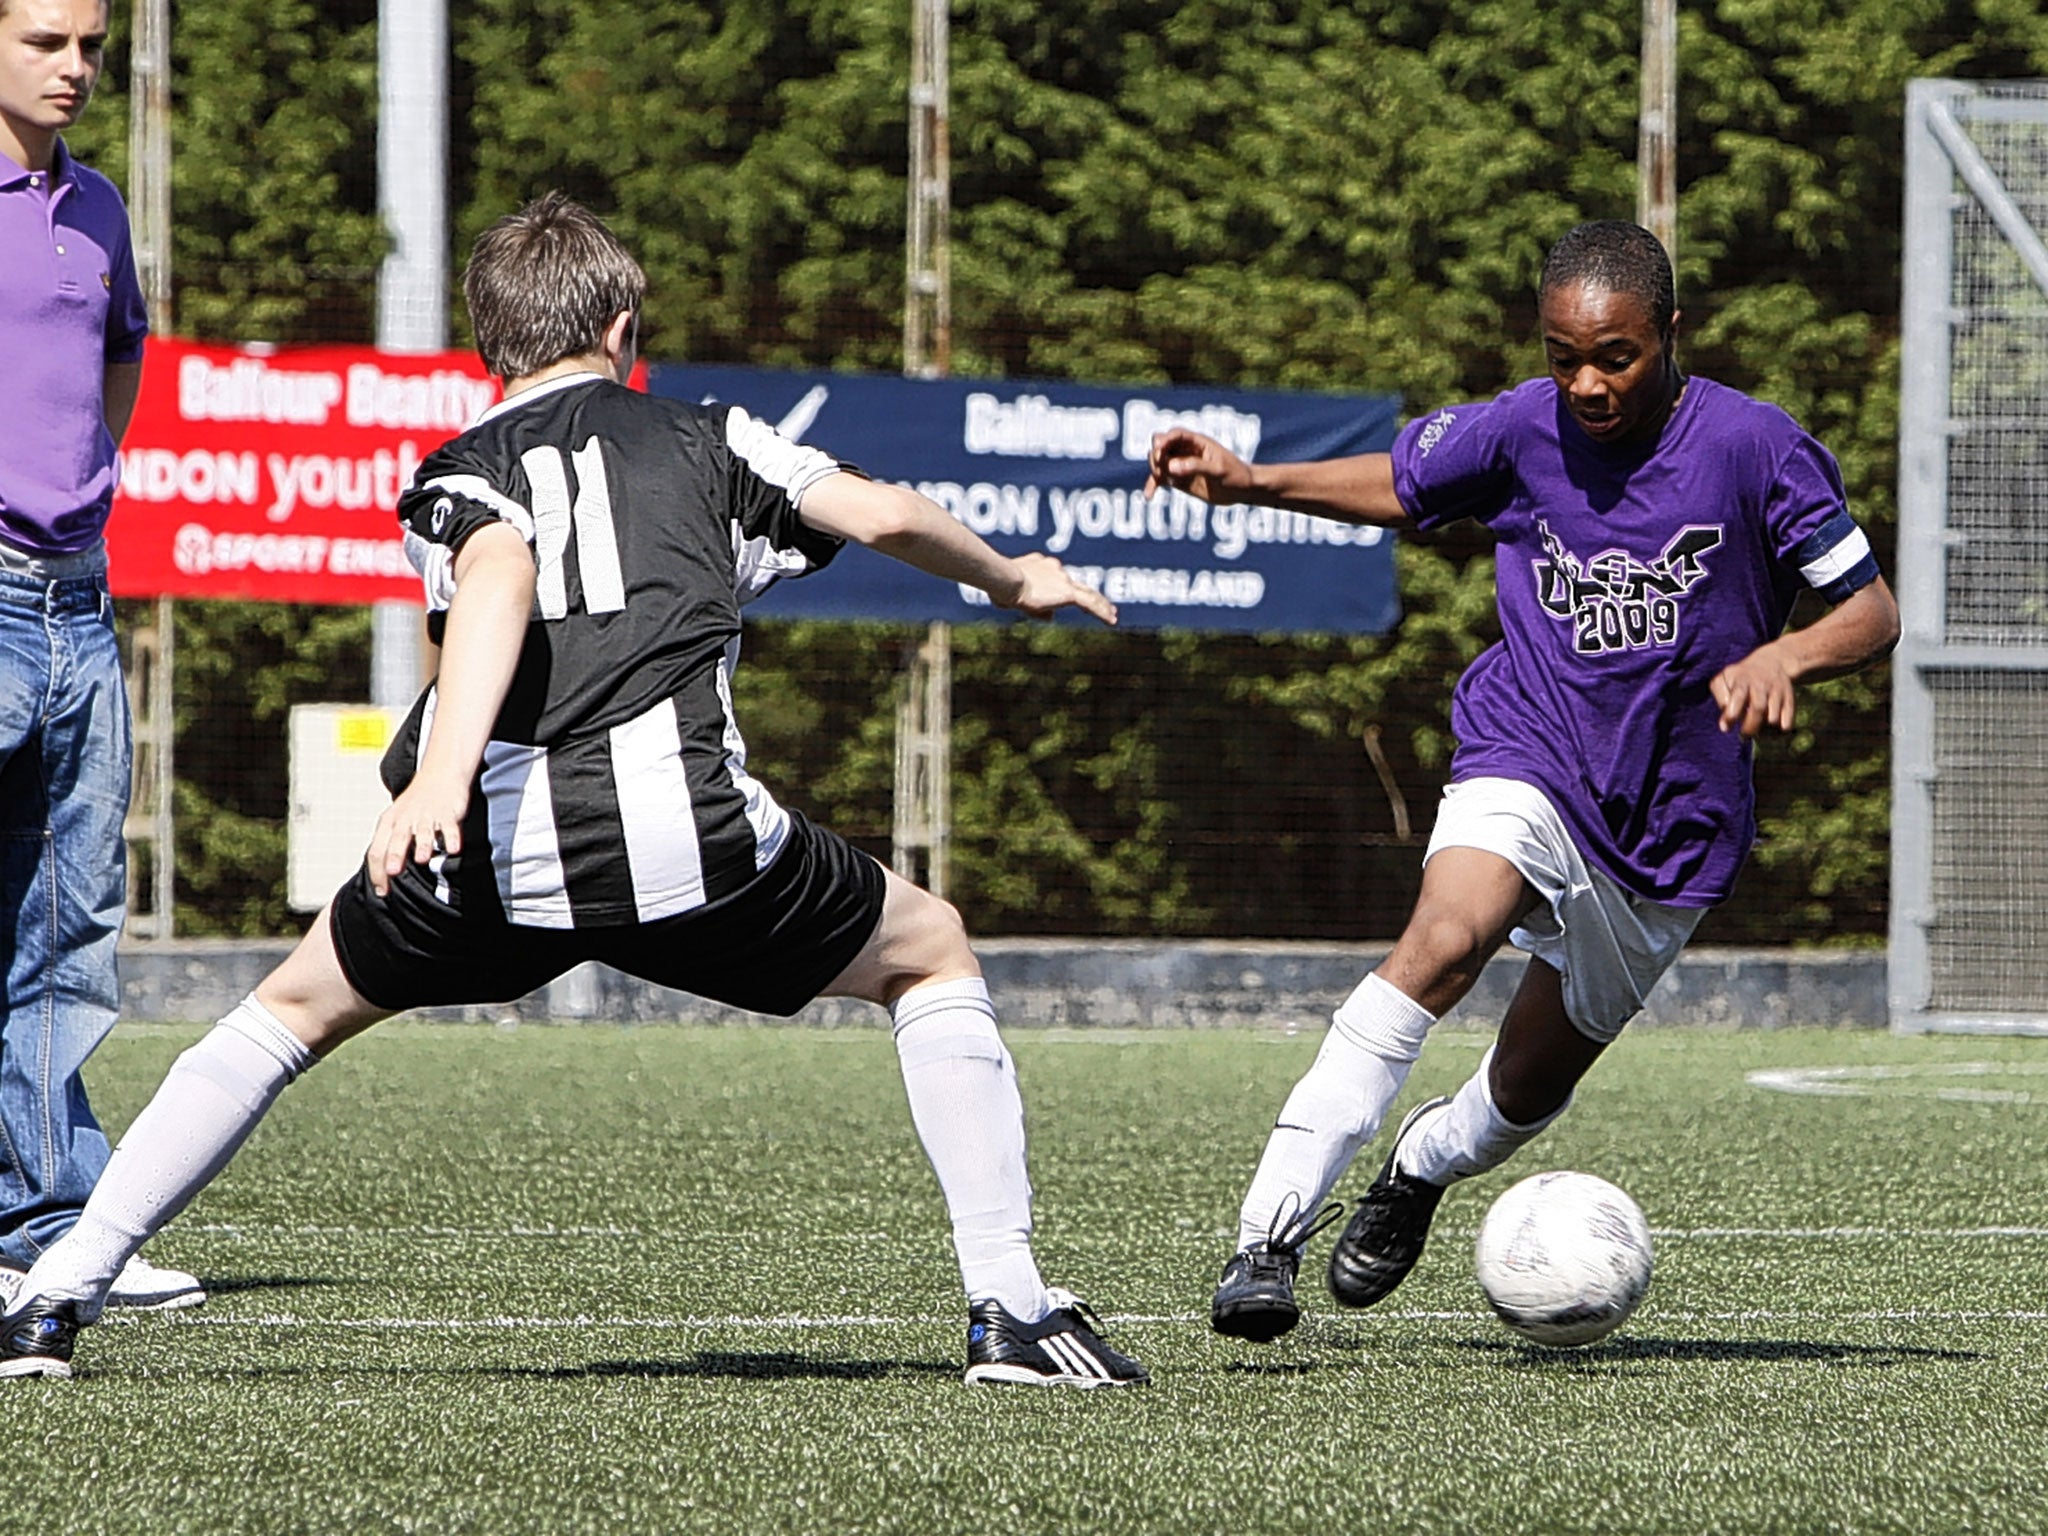 Raheem Sterling (right) graduated from success as a schoolboy in the 2009 London Youth Games to playing in the Premier League and for England